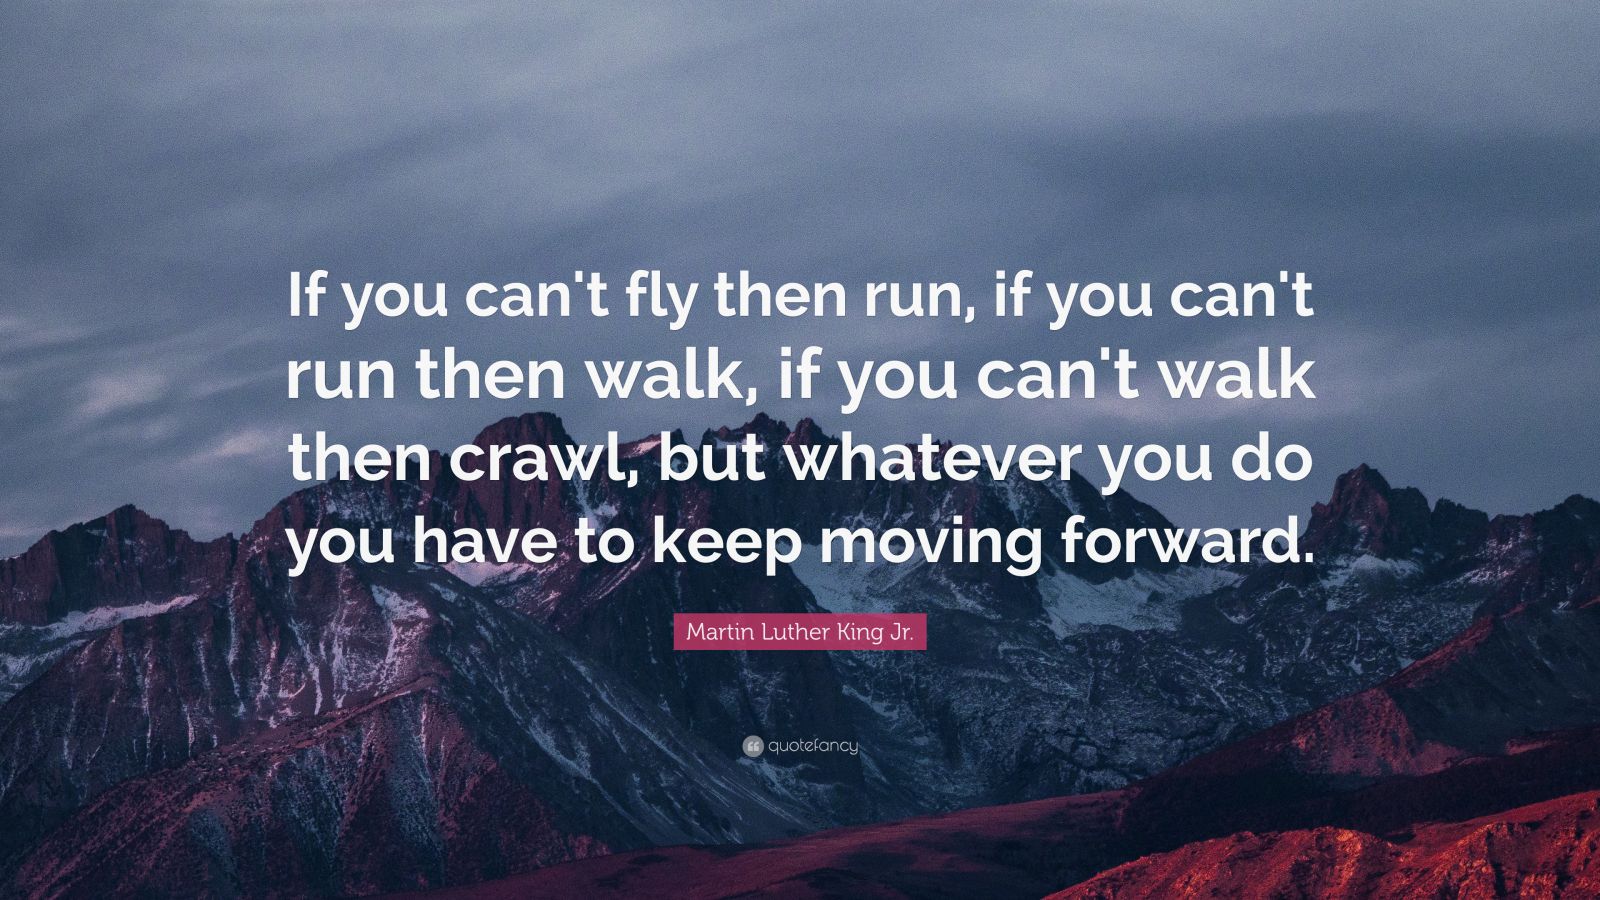 Martin Luther King Jr. Quote: “If you can’t fly then run, if you can’t